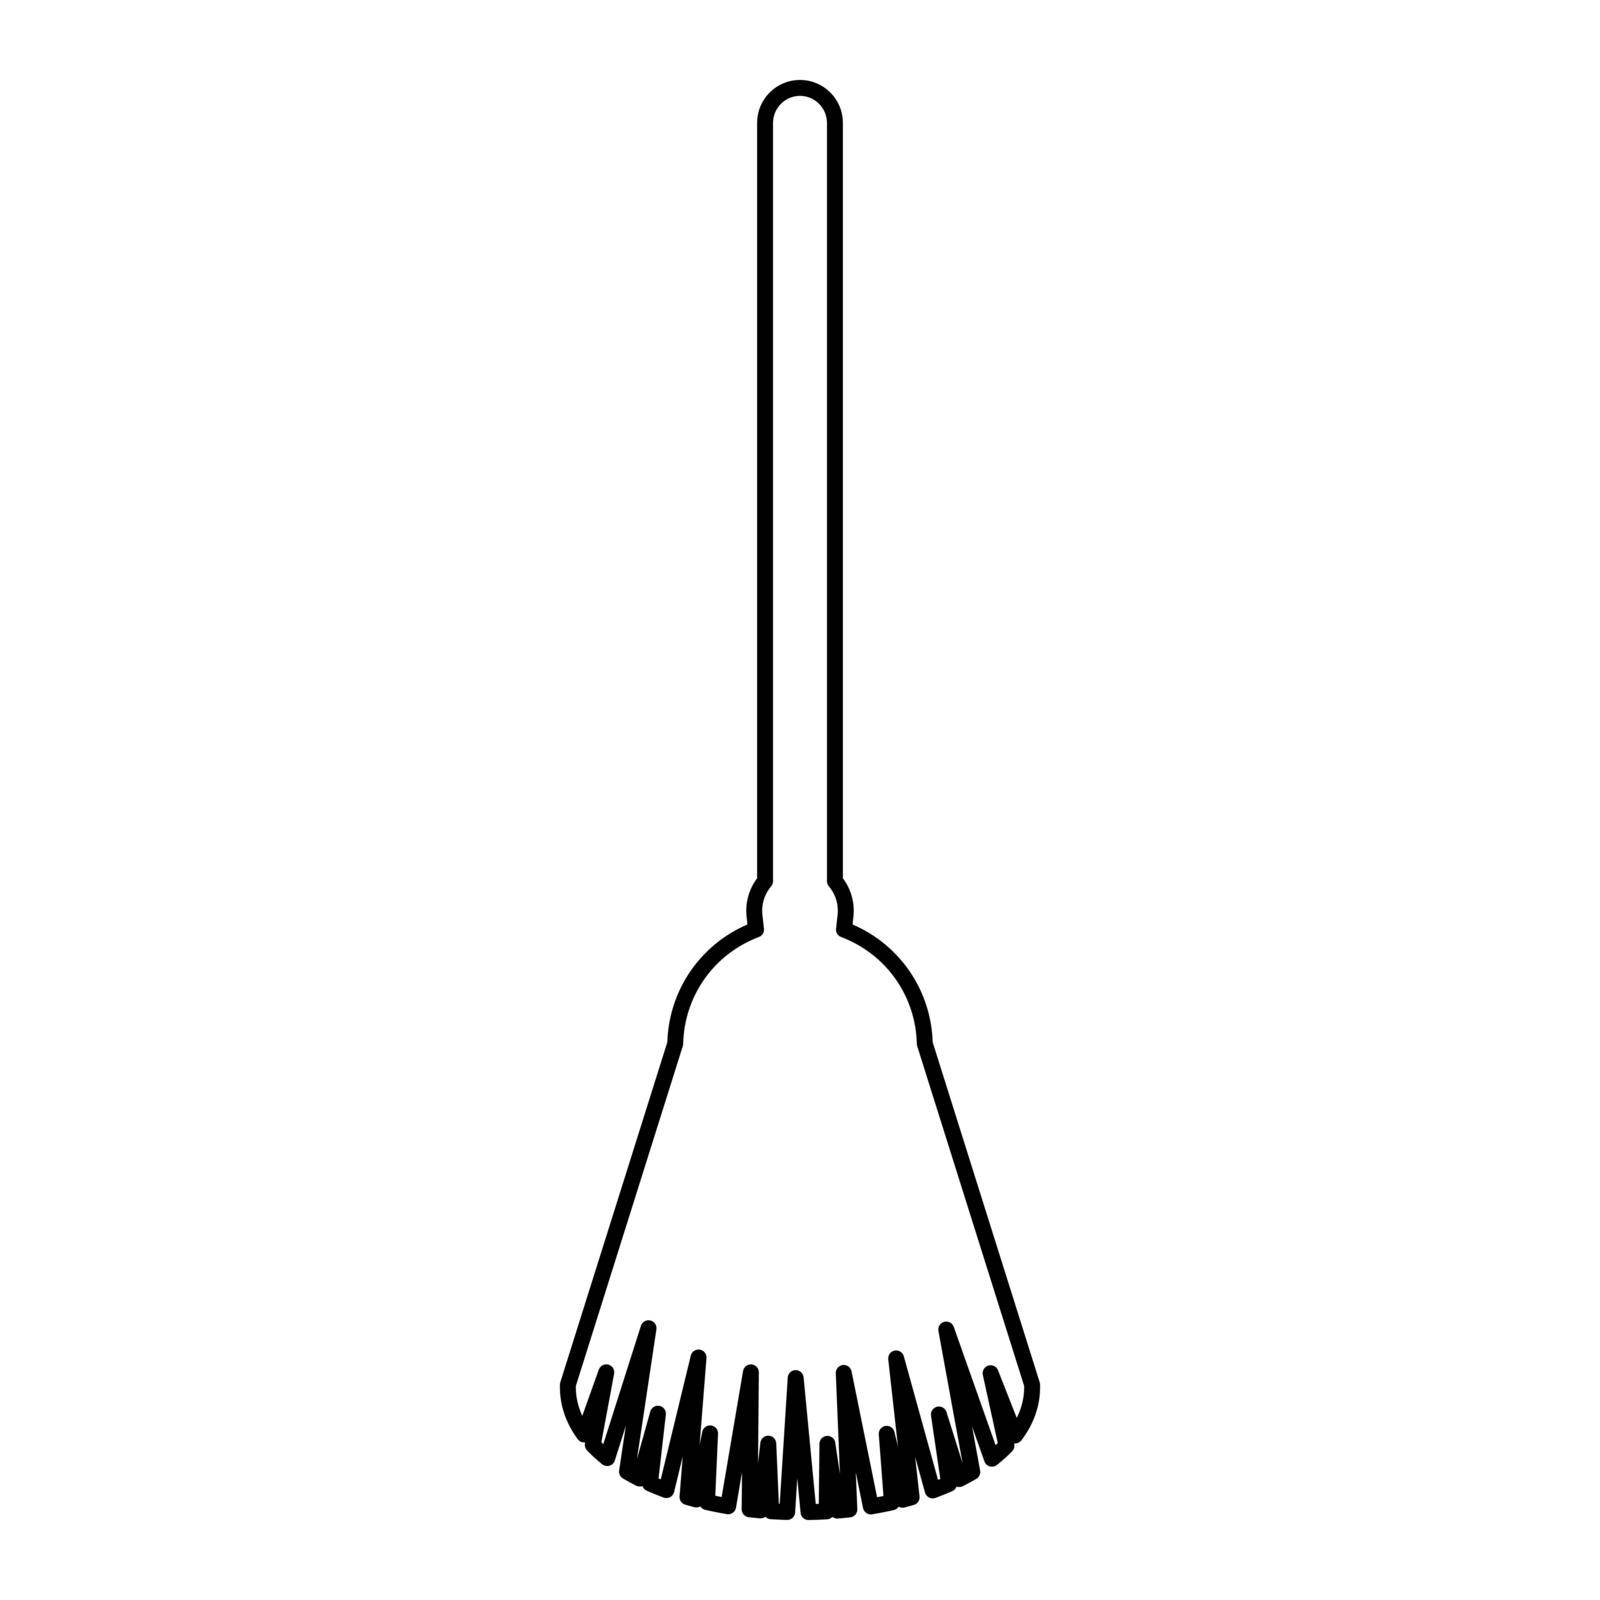 Broom Besom made from twigs Tool for cleaning Sweep concept Panicle Halloween accessory contour outline icon black color vector illustration flat style image by serhii435